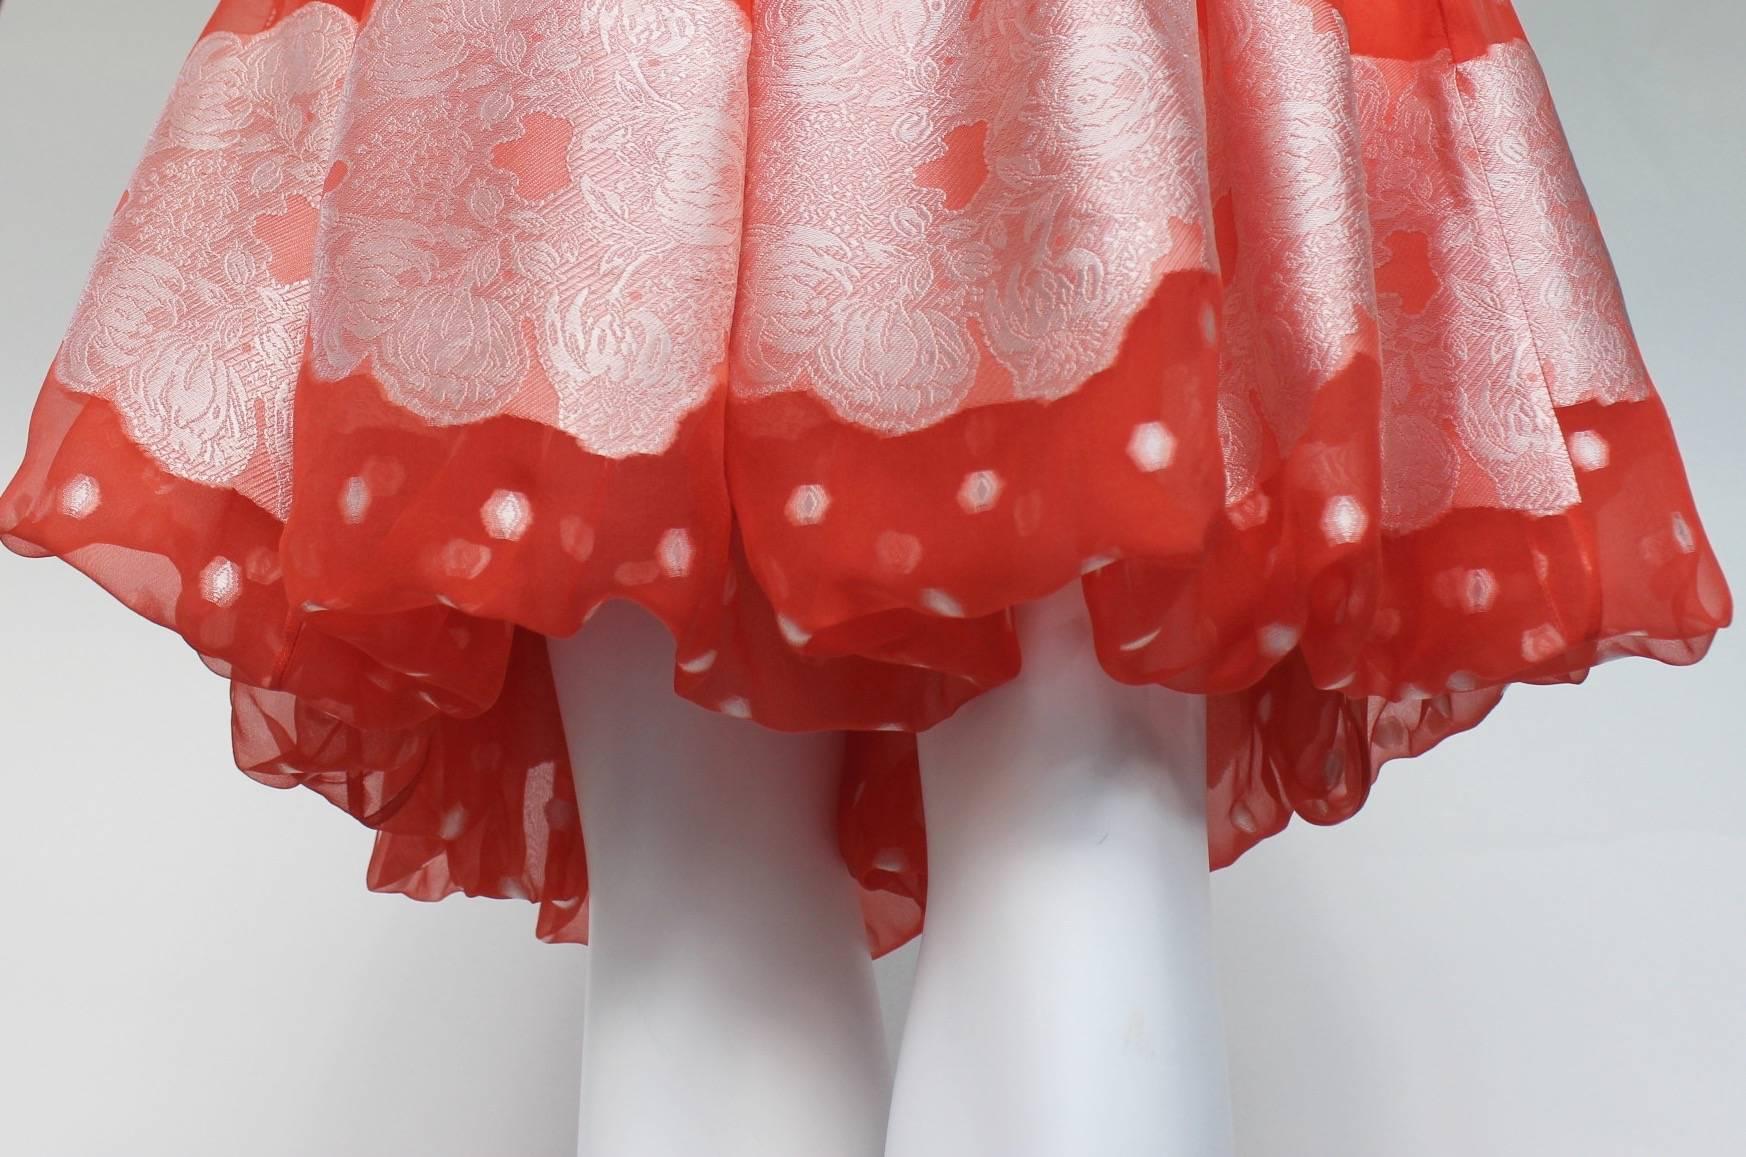 Sweet daydreams are made of this: a light-as-air skirt by Nina Ricci. Stitched together from lengths of tangerine silk, the gored construction is tucked under at the hem to add extra buoyancy to the silhouette. Then as if the wearer had strolled